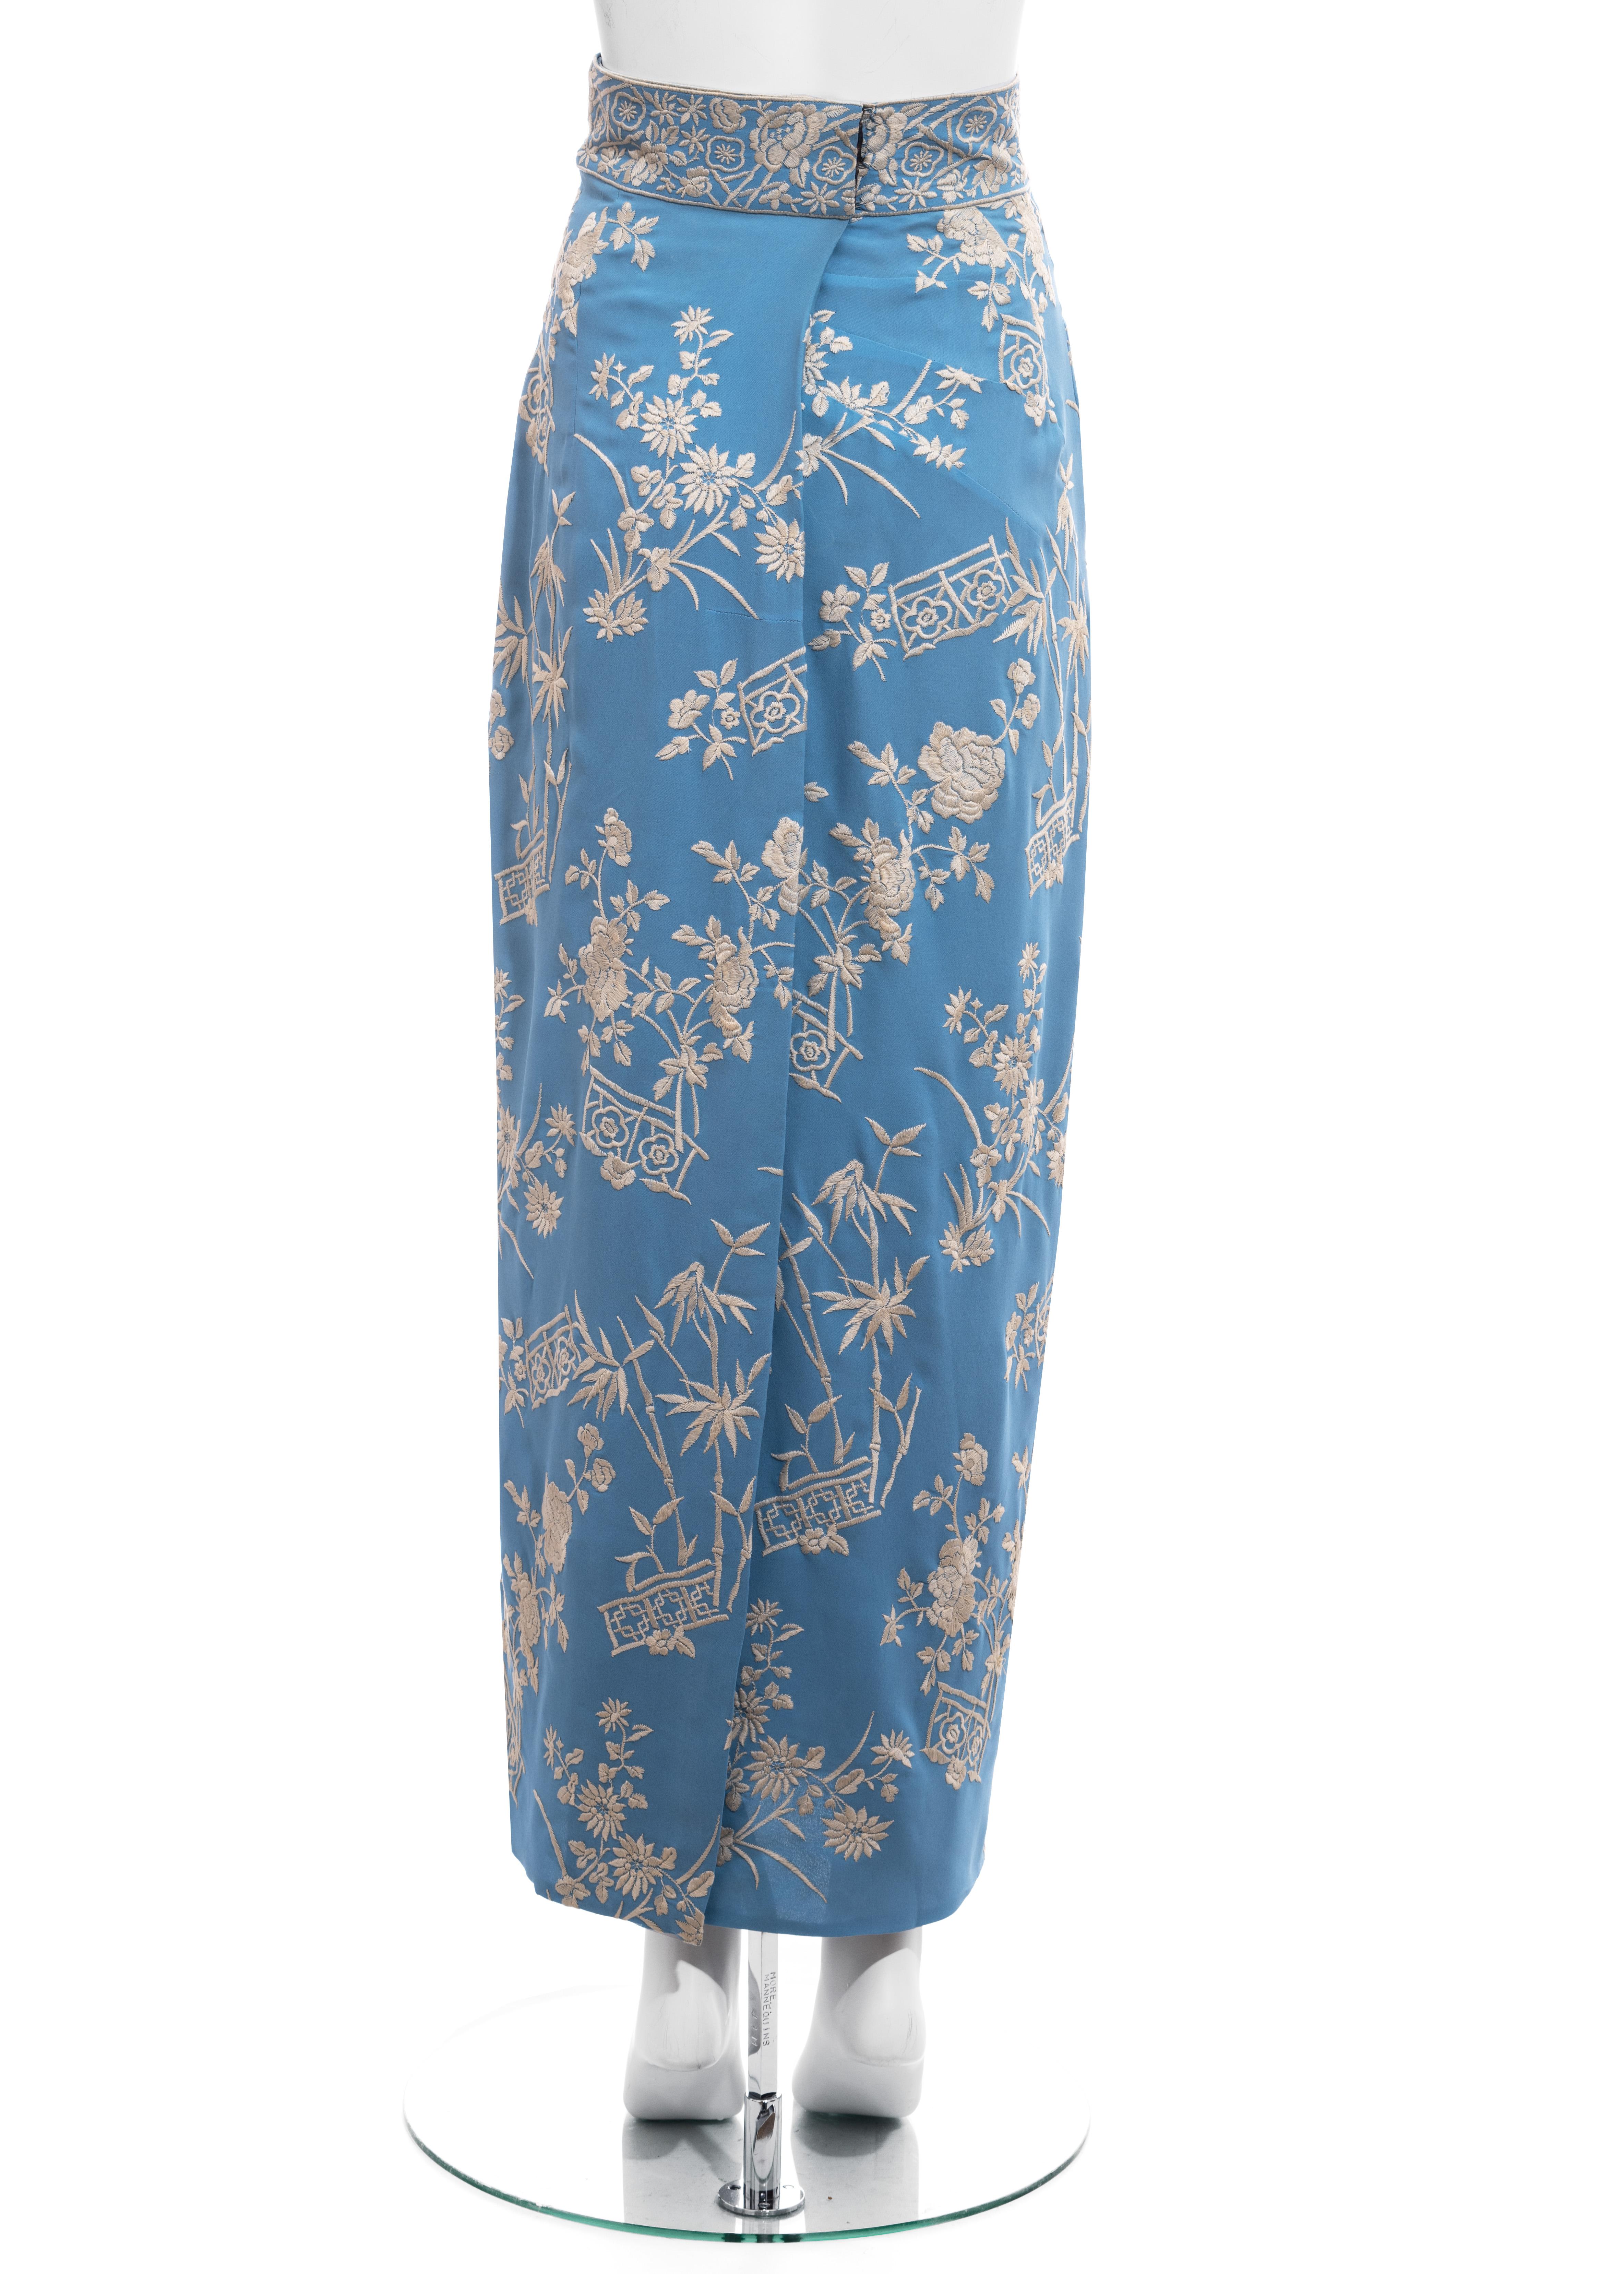 Dolce & Gabbana blue silk evening wrap skirt with floral embroidery, ss 1997 2